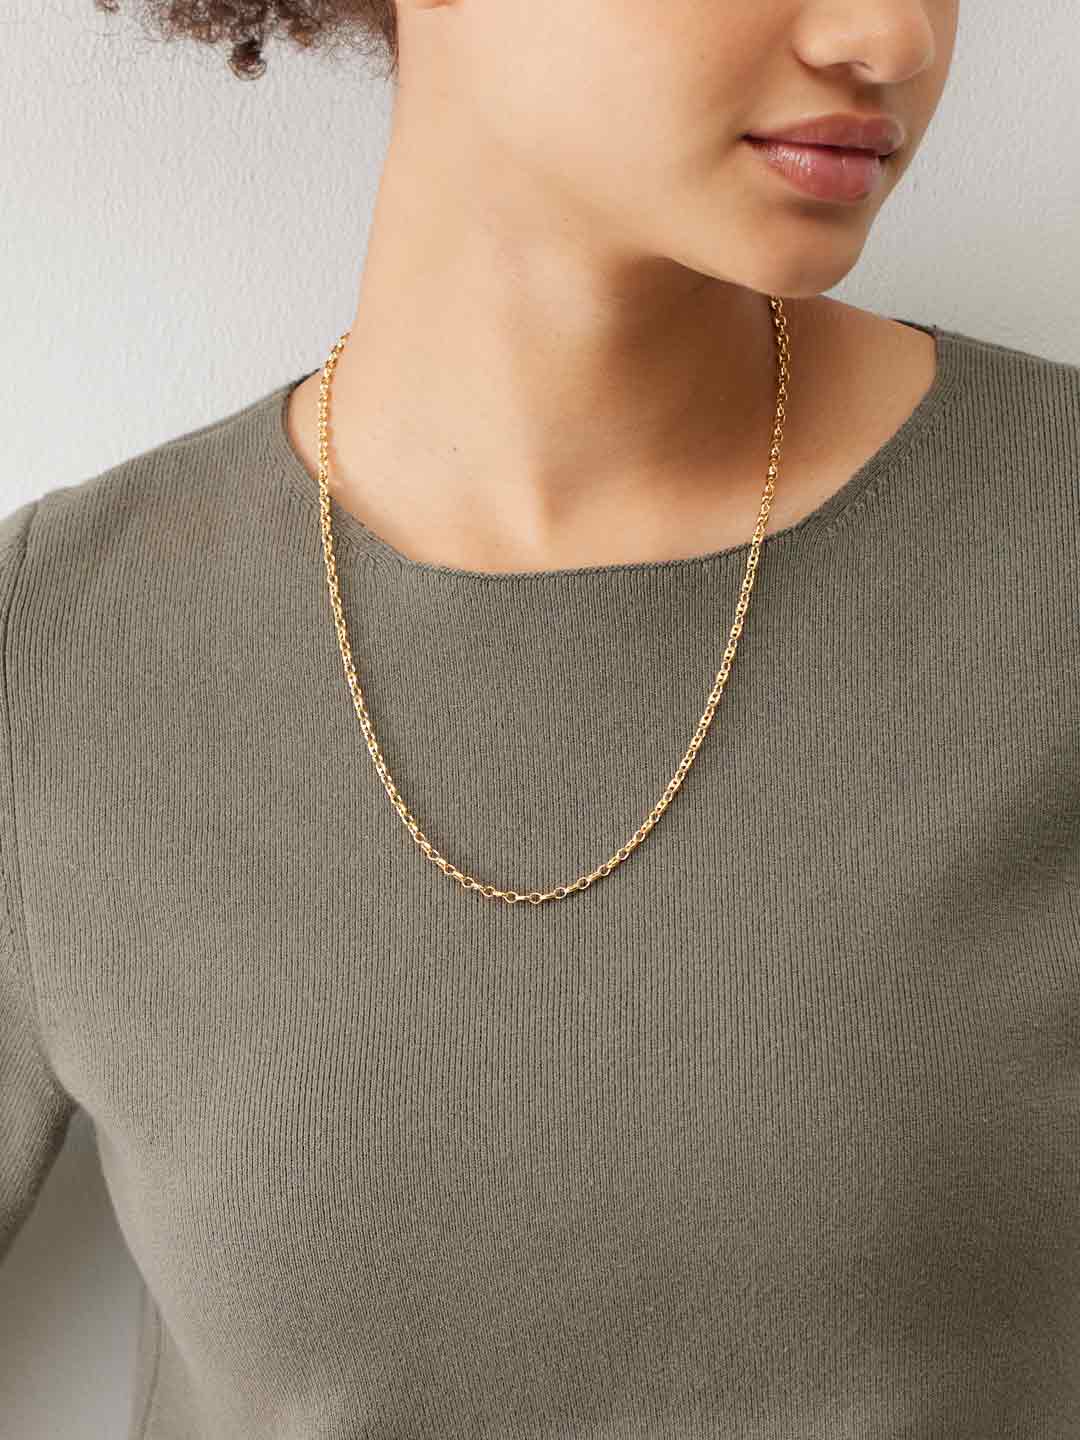 Long Classic Delicate Chain - Yellow Gold